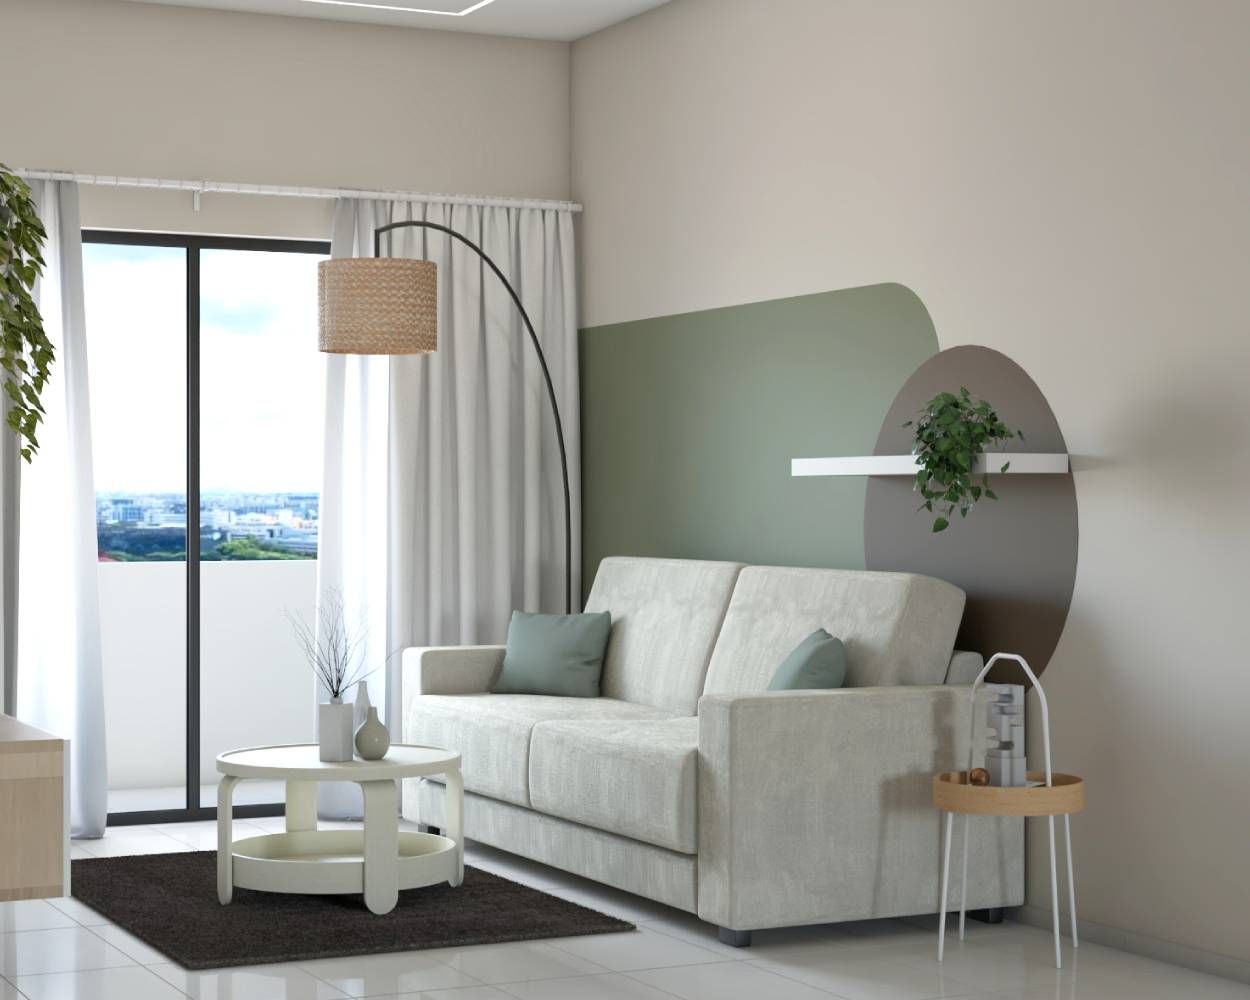 Modern Living Room Design With Off-White 2-Seater Sofa And Circular Coffee Table